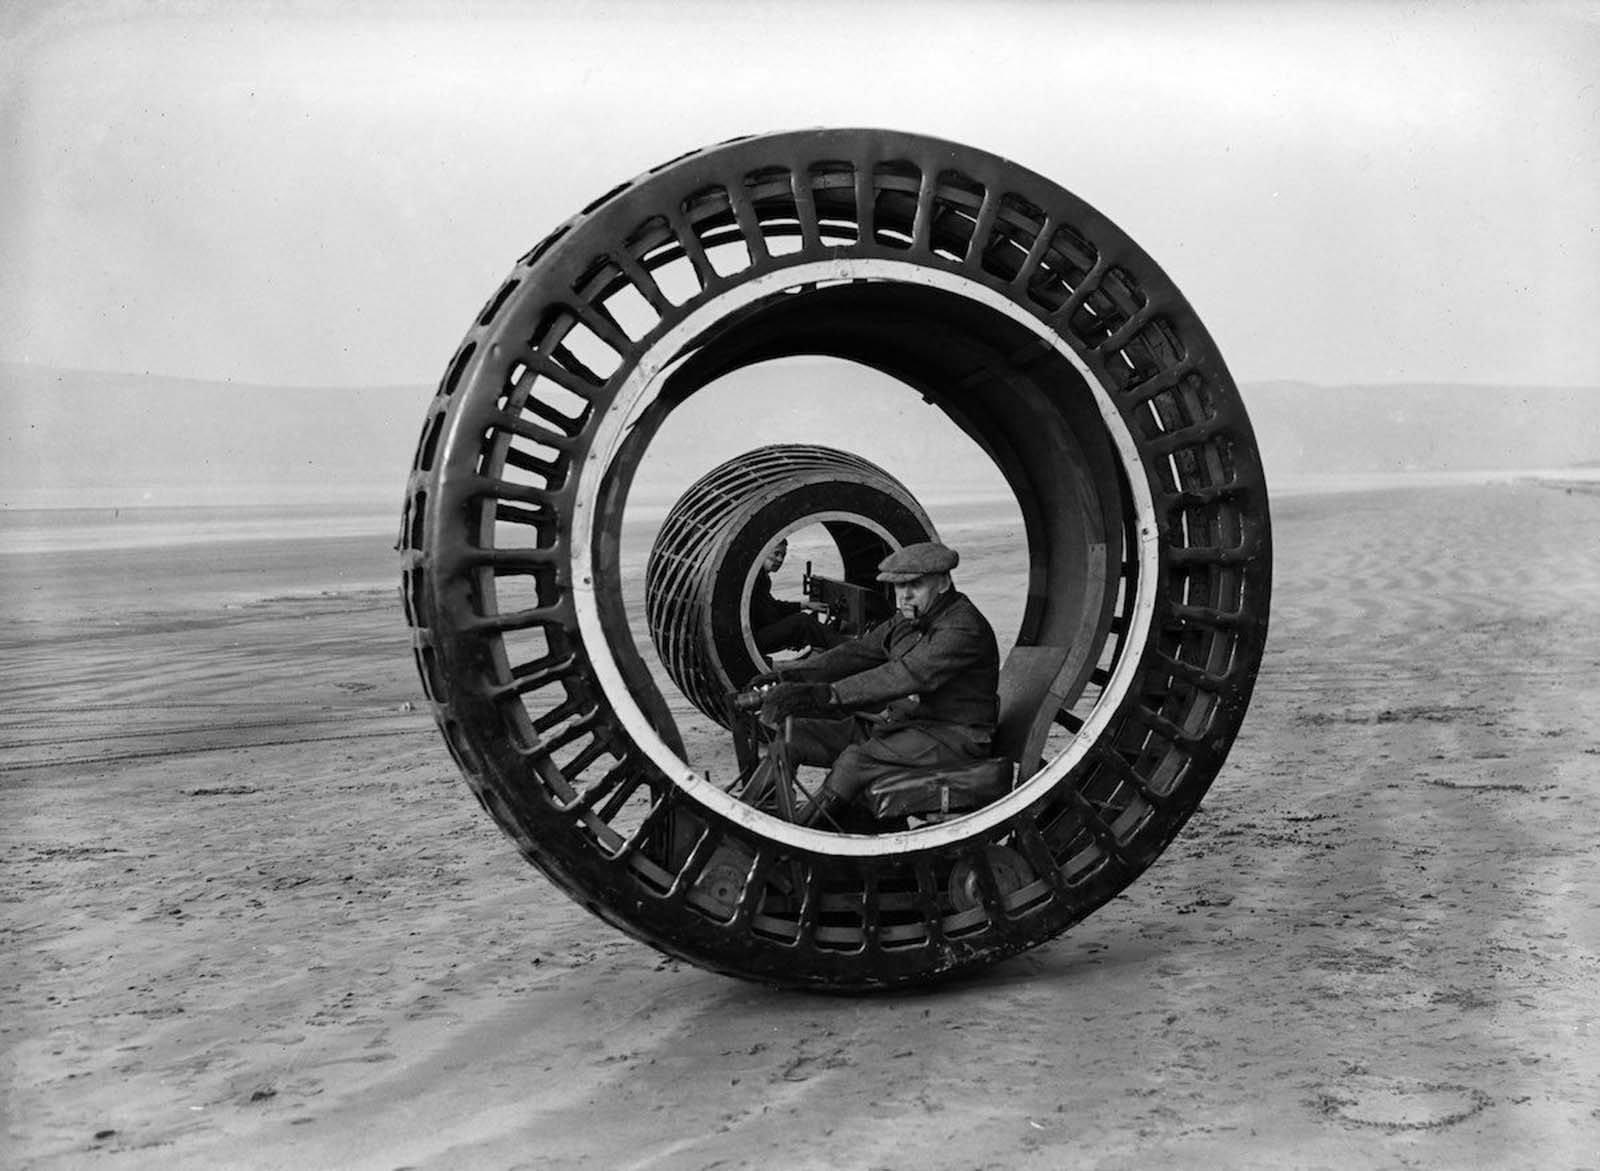 Electronically driven wheels which revolve while the drivers remain stationary are tested at Bream Sands, Weston-super-Mare, Somerset, England, 1932.